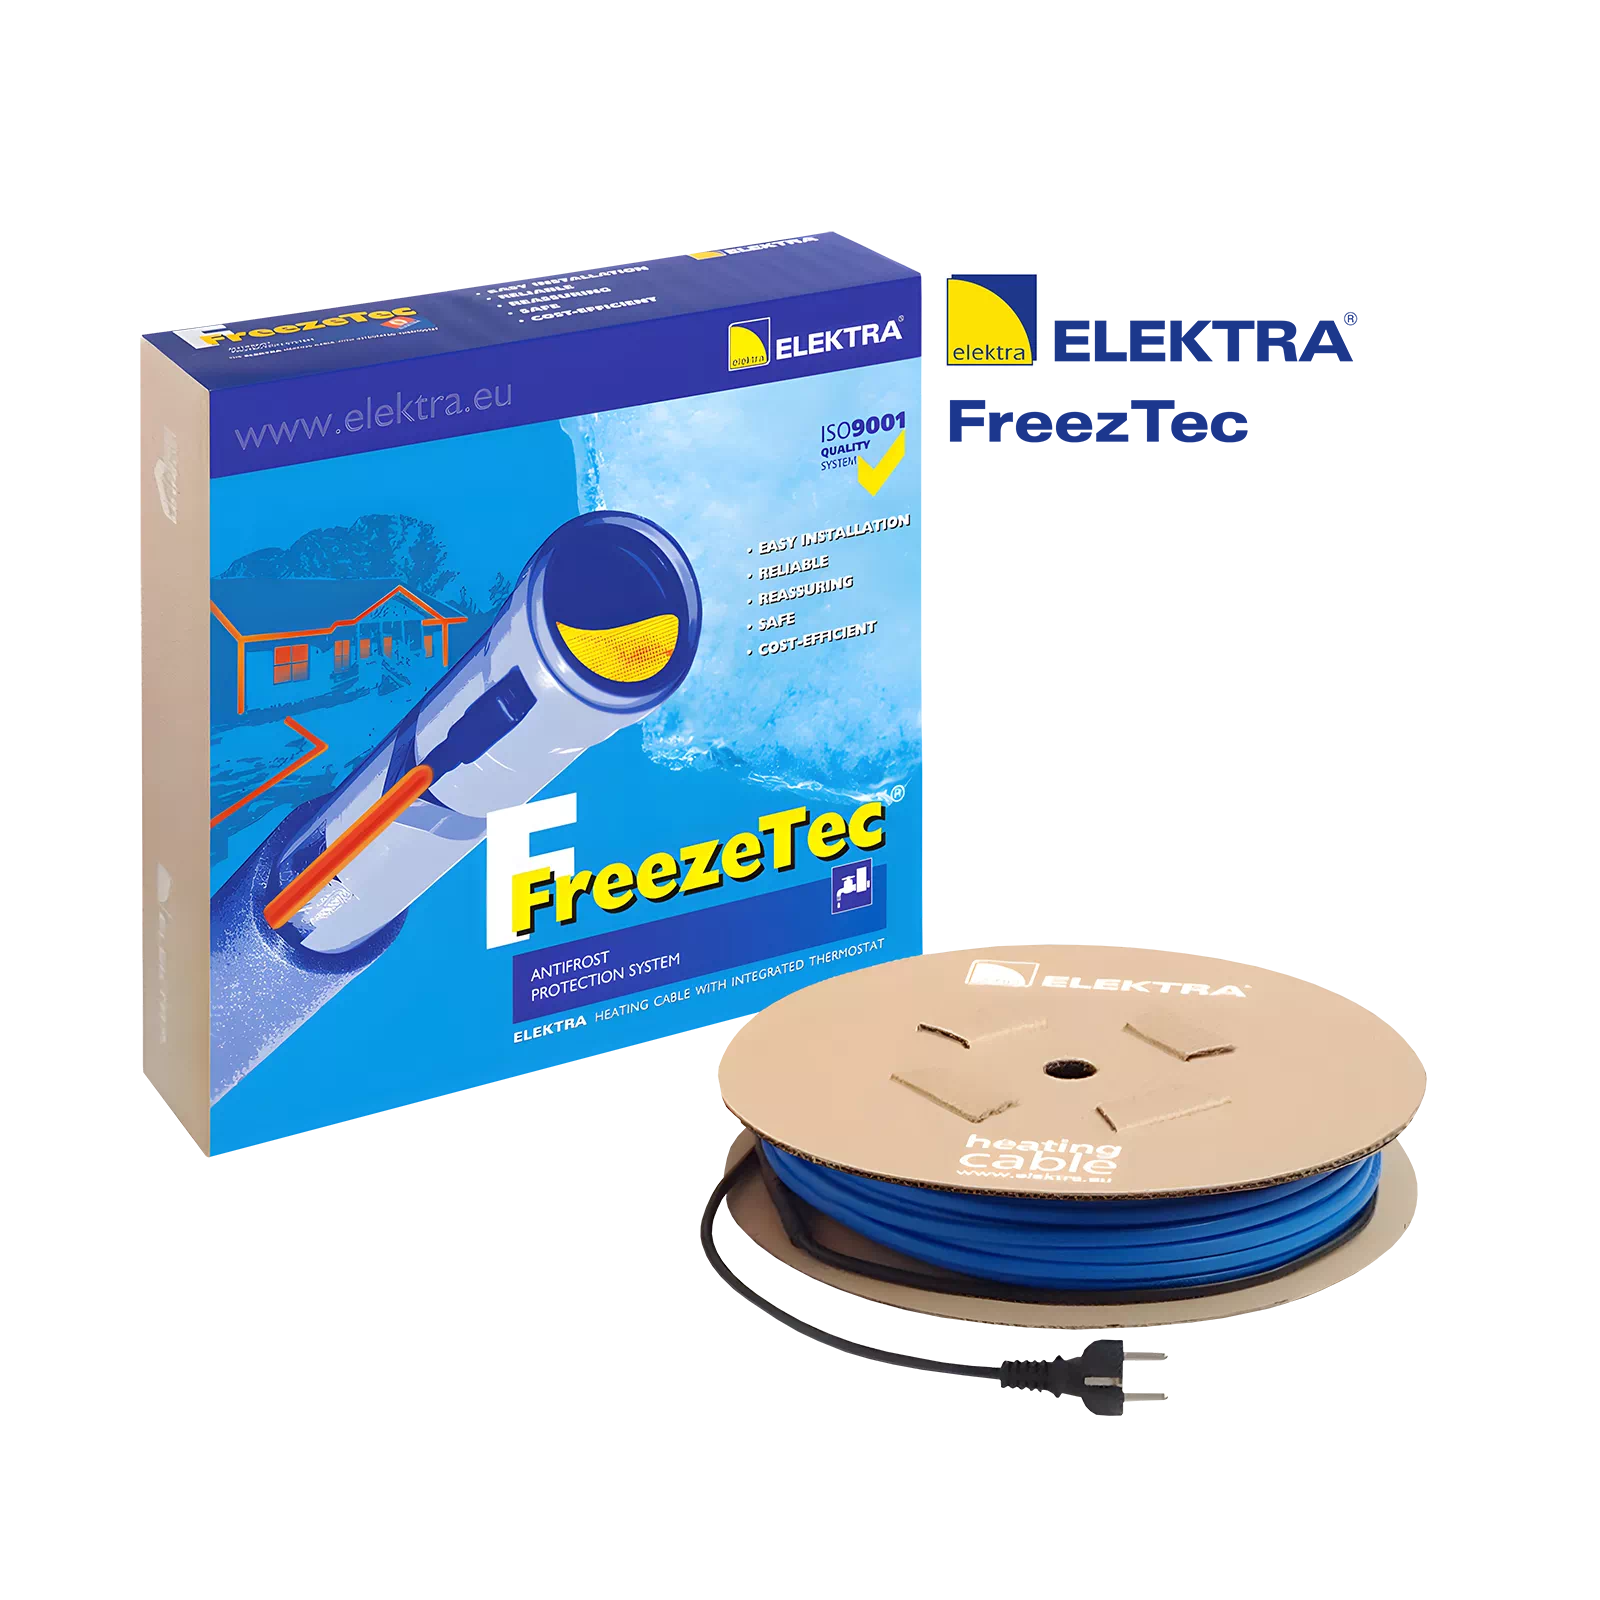 ELEKTRA-FreezTec-Gutter-Pipe-Frost-Protection-Heating-Cable